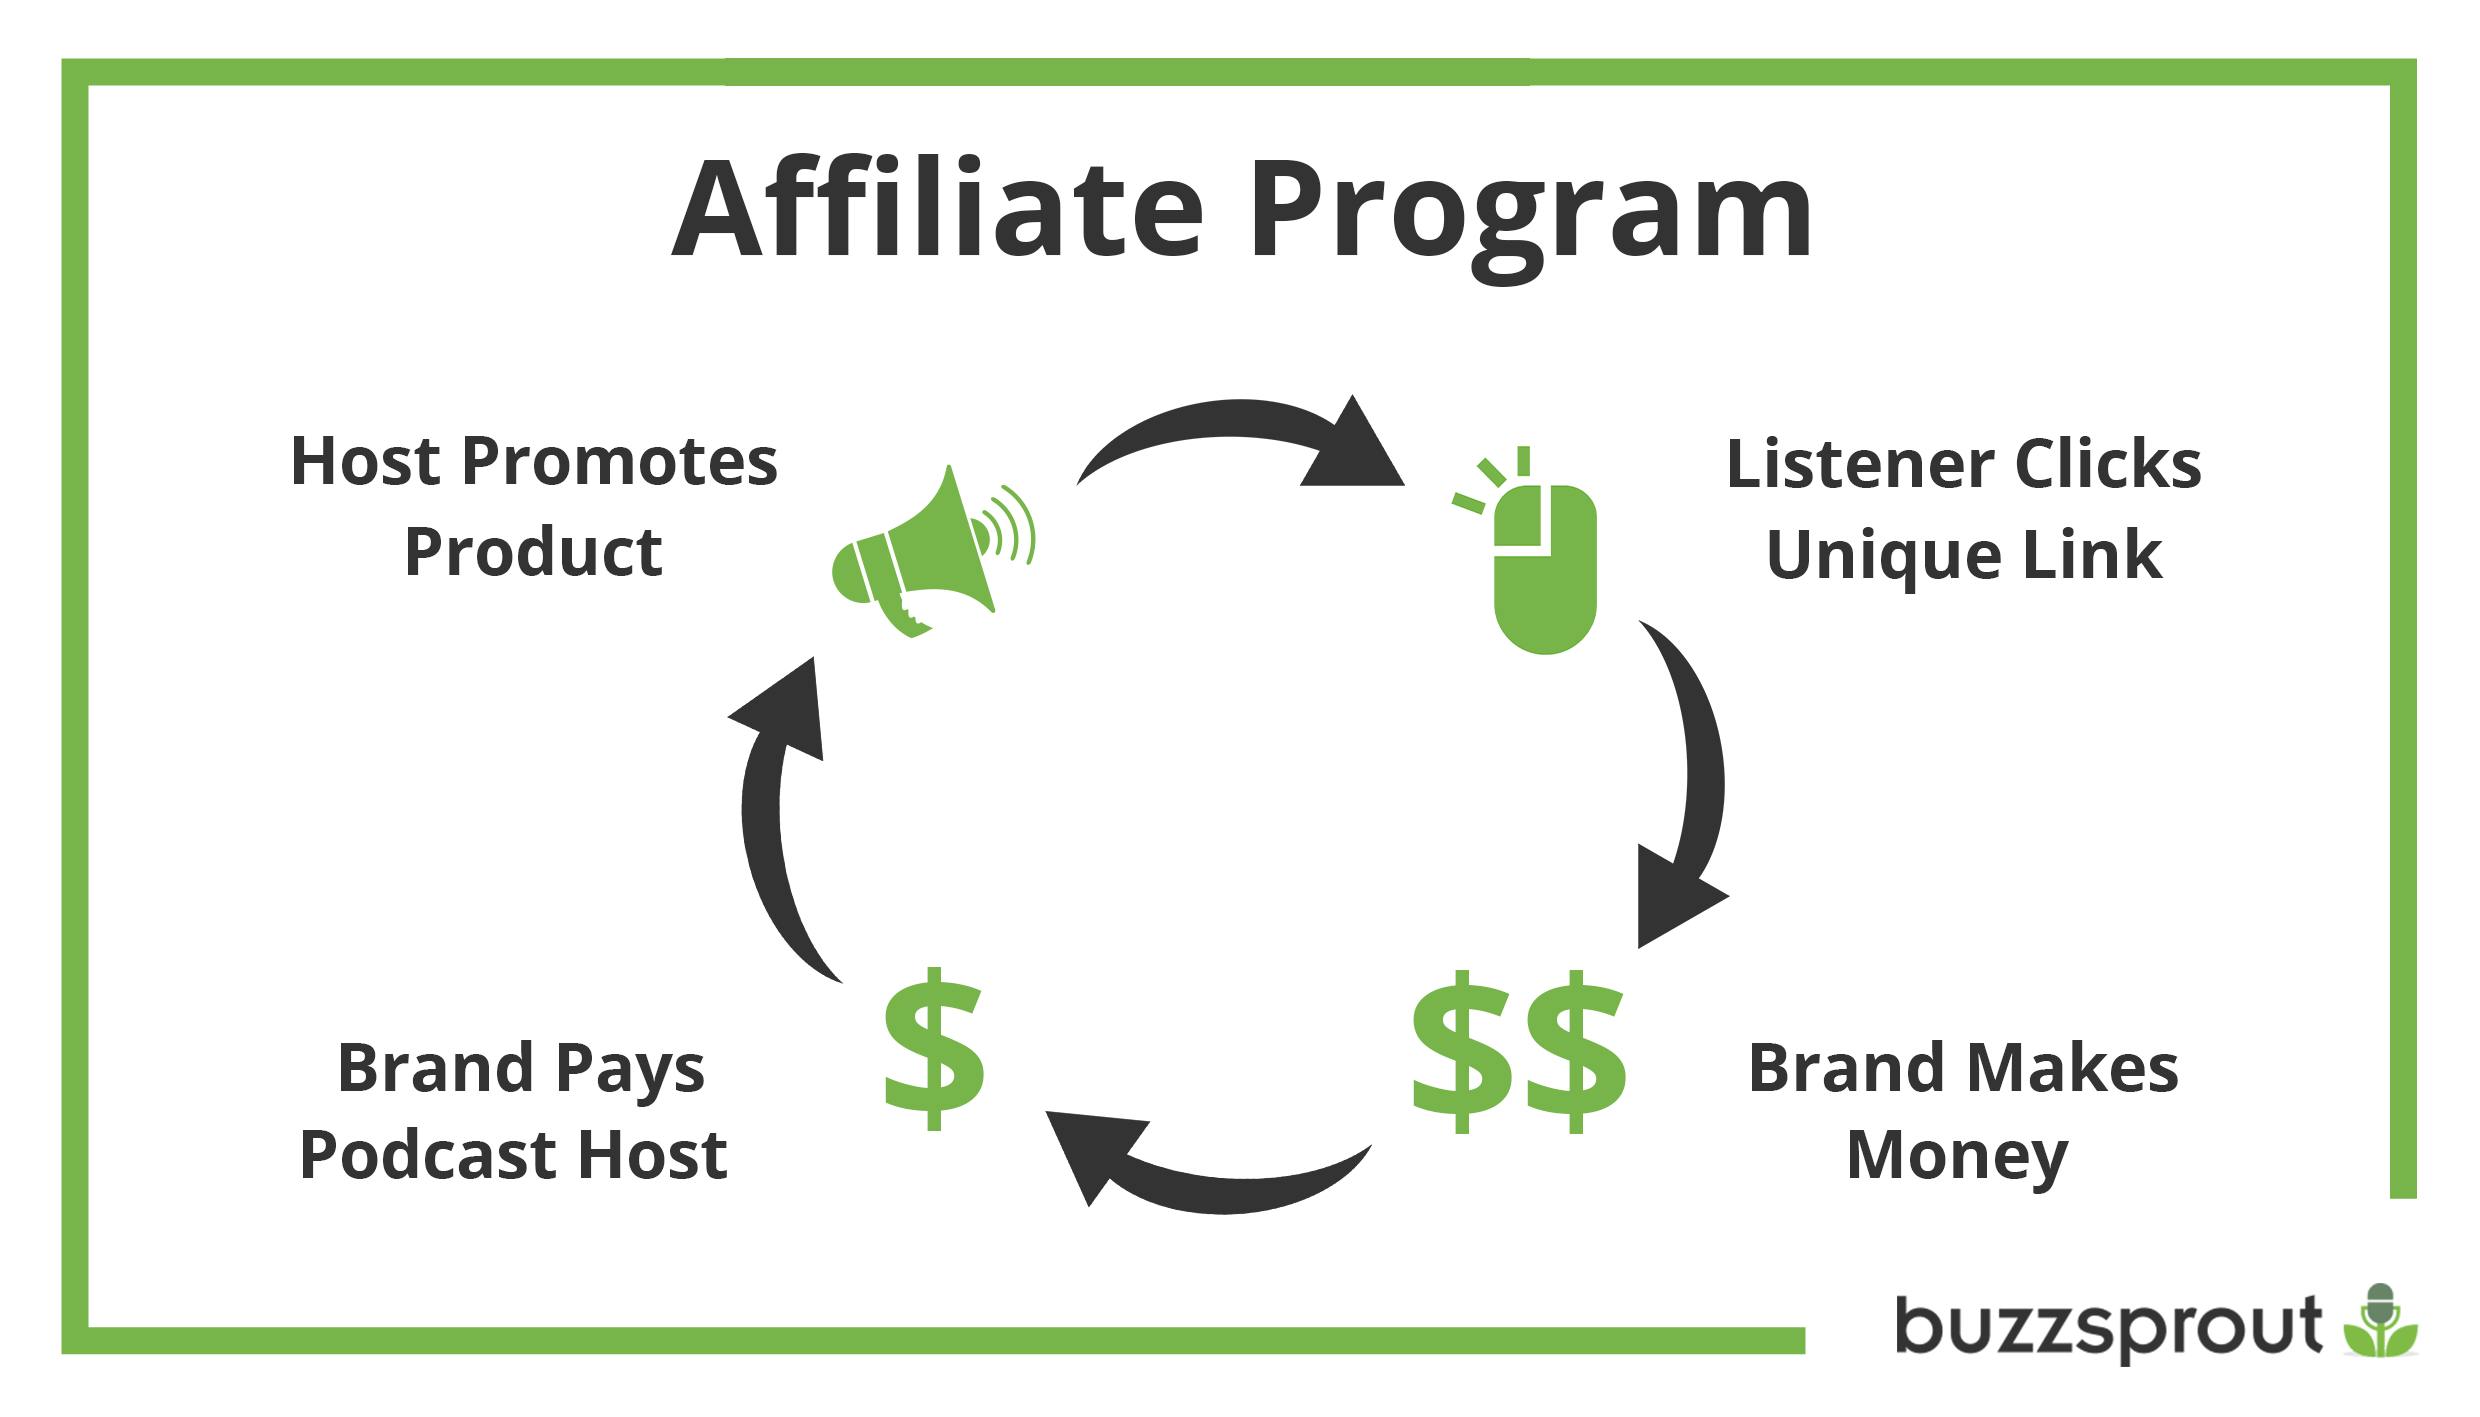 Affiliated: ClickBank's Official Affiliate Marketing Podcast on Apple  Podcasts